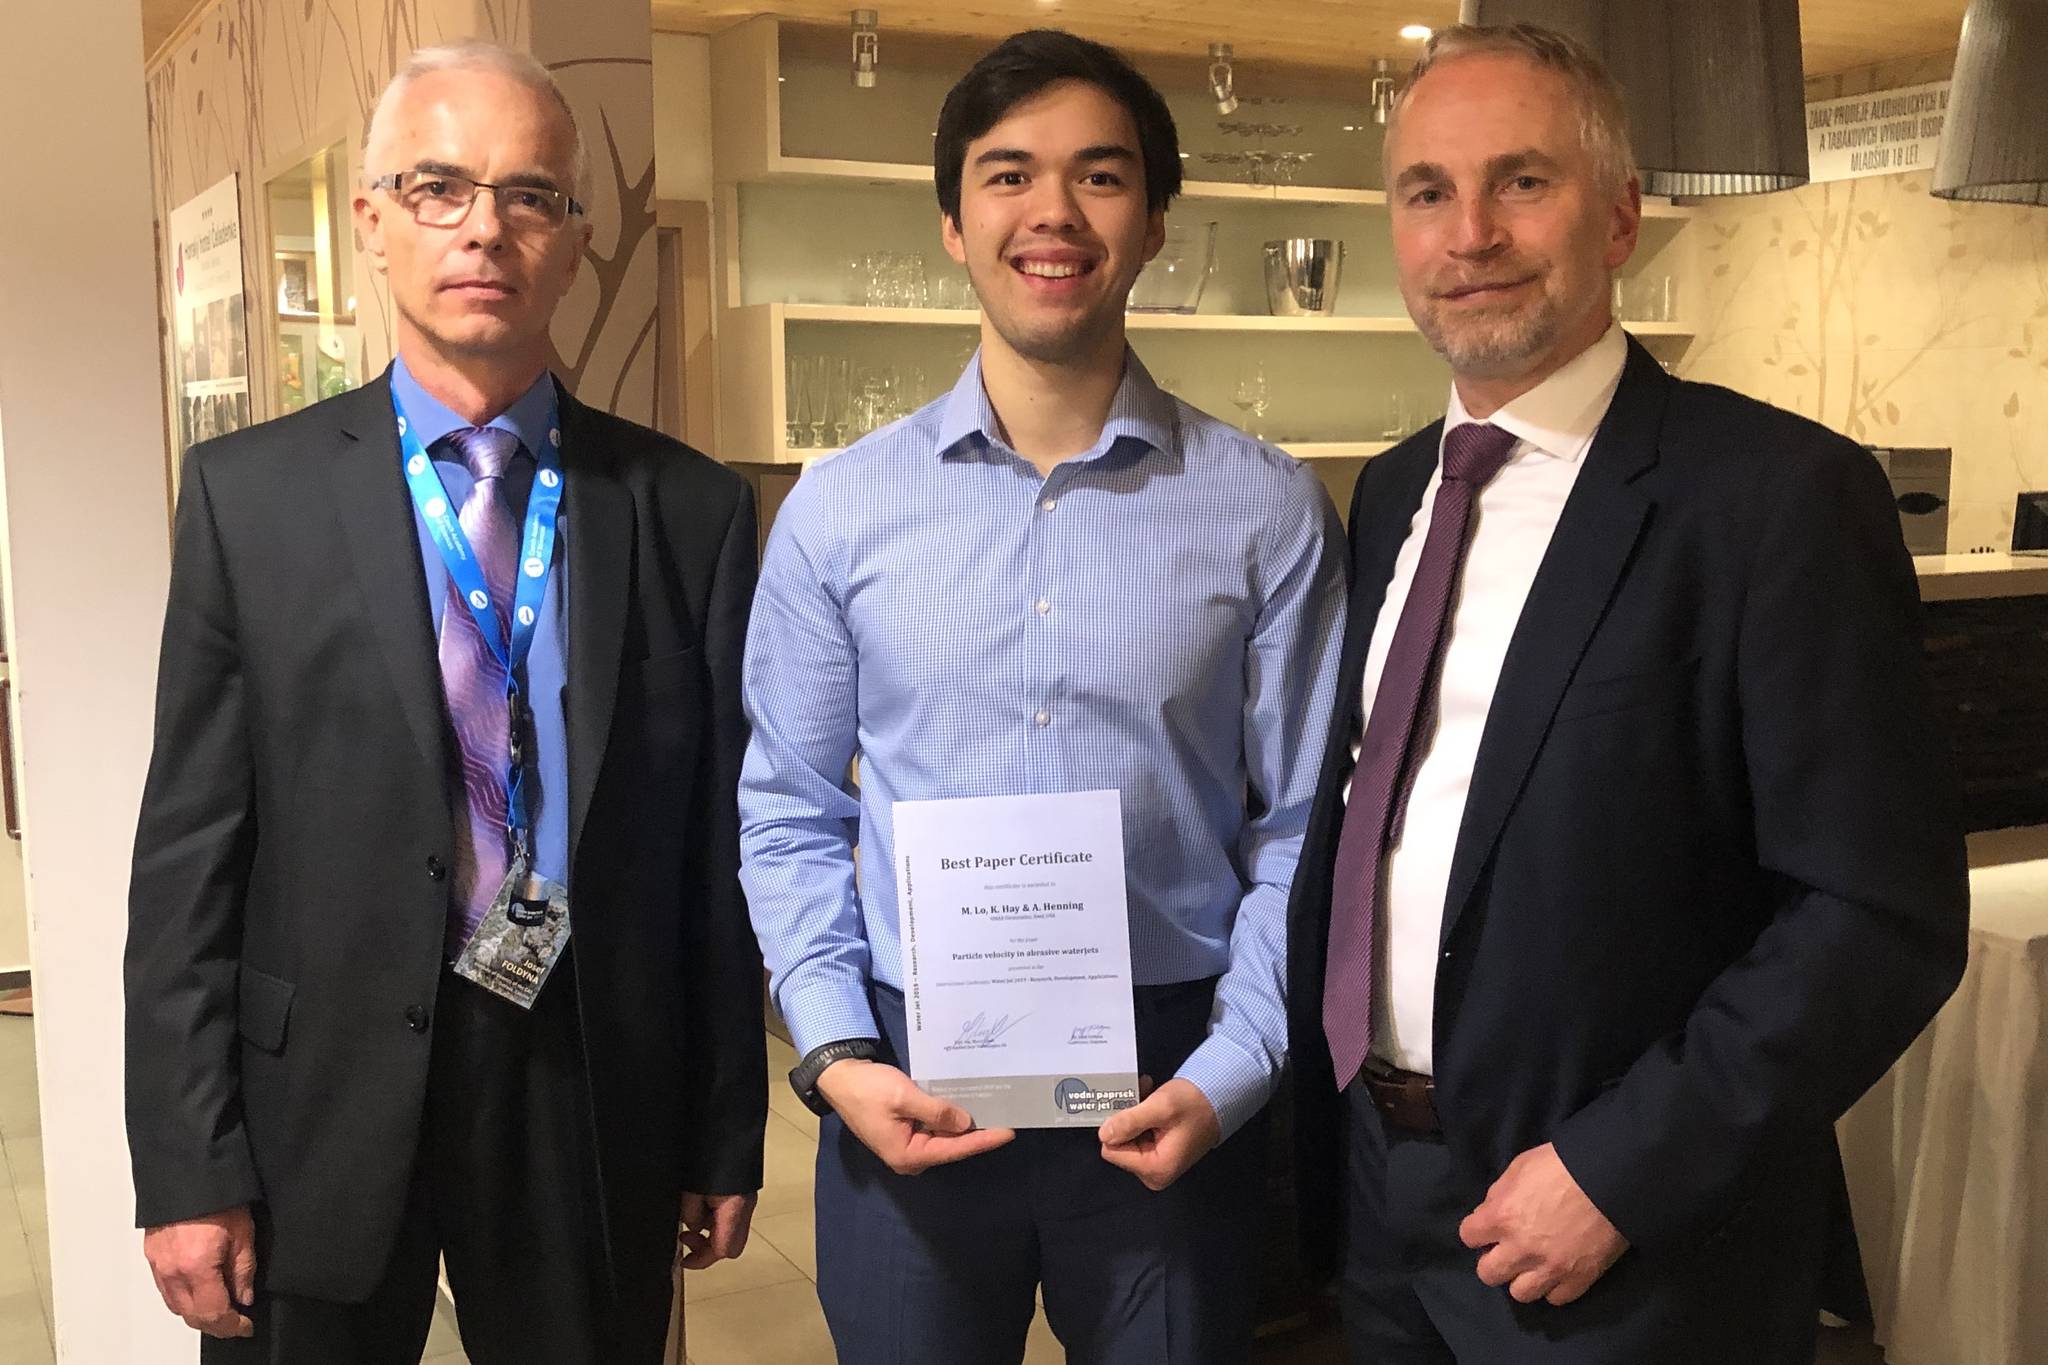 OMAX trio selected for Best Paper at Water Jet 2019... - Kent Reporter